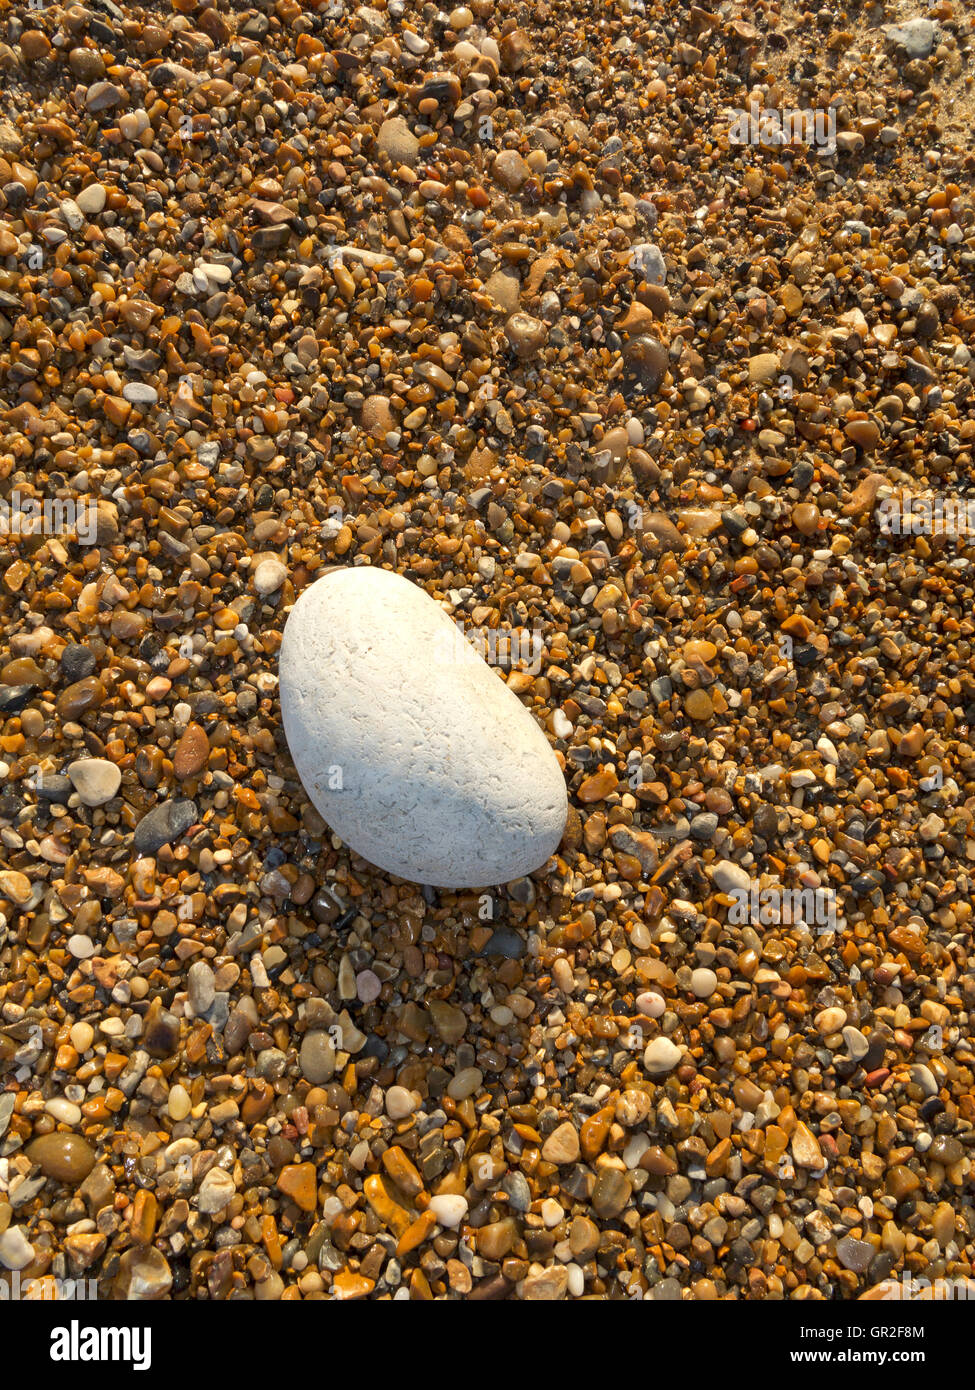 A flat overhead shot of small beach pebbles with a single large white pebble  Stock Photo - Alamy